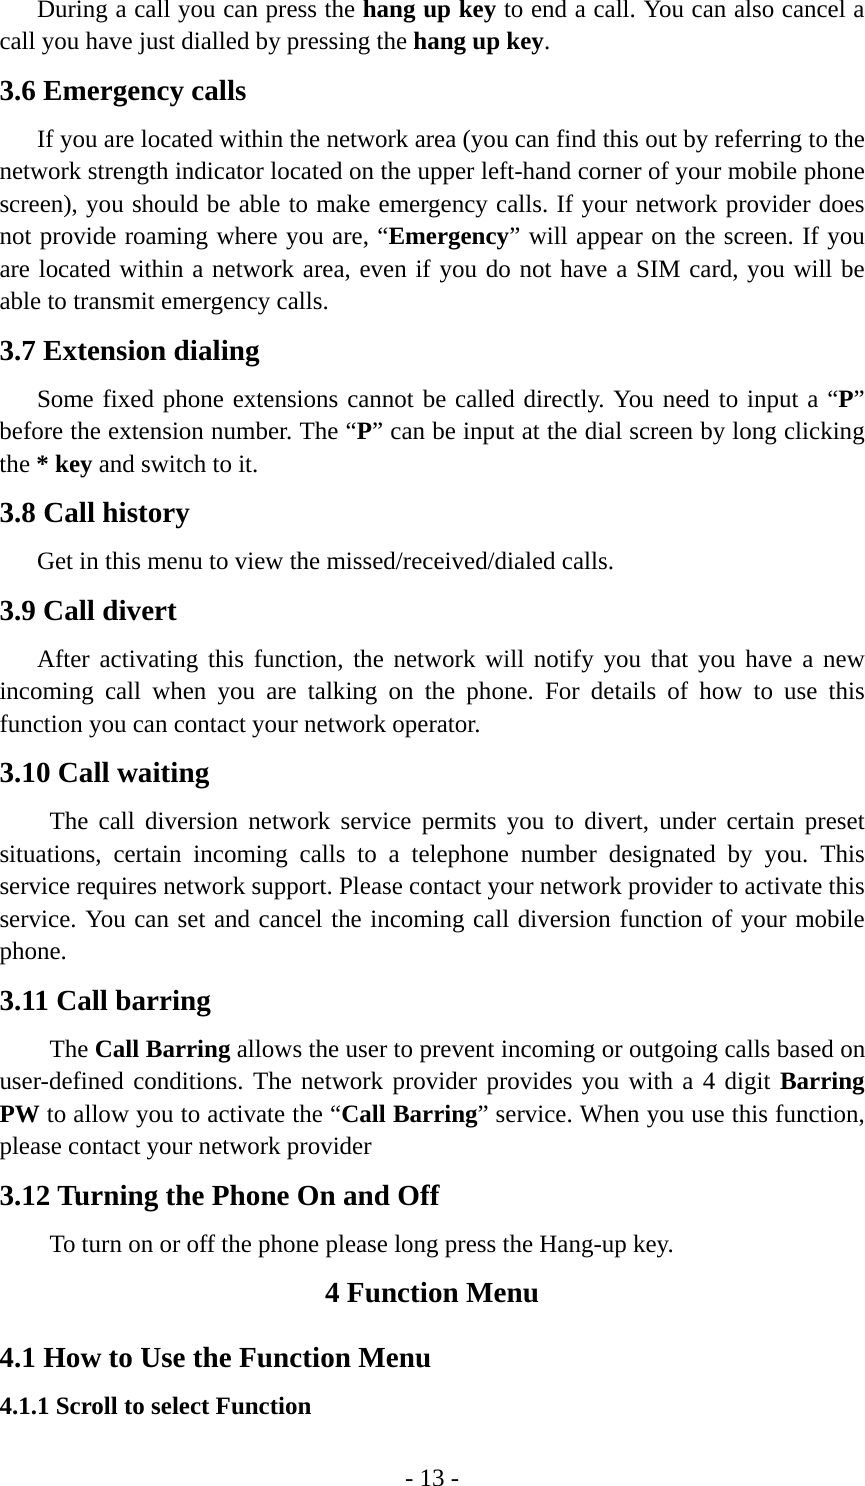 - 13 -       During a call you can press the hang up key to end a call. You can also cancel a call you have just dialled by pressing the hang up key. 3.6 Emergency calls       If you are located within the network area (you can find this out by referring to the network strength indicator located on the upper left-hand corner of your mobile phone screen), you should be able to make emergency calls. If your network provider does not provide roaming where you are, “Emergency” will appear on the screen. If you are located within a network area, even if you do not have a SIM card, you will be able to transmit emergency calls. 3.7 Extension dialing    Some fixed phone extensions cannot be called directly. You need to input a “P” before the extension number. The “P” can be input at the dial screen by long clicking the * key and switch to it. 3.8 Call history       Get in this menu to view the missed/received/dialed calls. 3.9 Call divert    After activating this function, the network will notify you that you have a new incoming call when you are talking on the phone. For details of how to use this function you can contact your network operator. 3.10 Call waiting     The call diversion network service permits you to divert, under certain preset situations, certain incoming calls to a telephone number designated by you. This service requires network support. Please contact your network provider to activate this service. You can set and cancel the incoming call diversion function of your mobile phone. 3.11 Call barring     The Call Barring allows the user to prevent incoming or outgoing calls based on user-defined conditions. The network provider provides you with a 4 digit Barring PW to allow you to activate the “Call Barring” service. When you use this function, please contact your network provider 3.12 Turning the Phone On and Off To turn on or off the phone please long press the Hang-up key. 4 Function Menu 4.1 How to Use the Function Menu 4.1.1 Scroll to select Function 